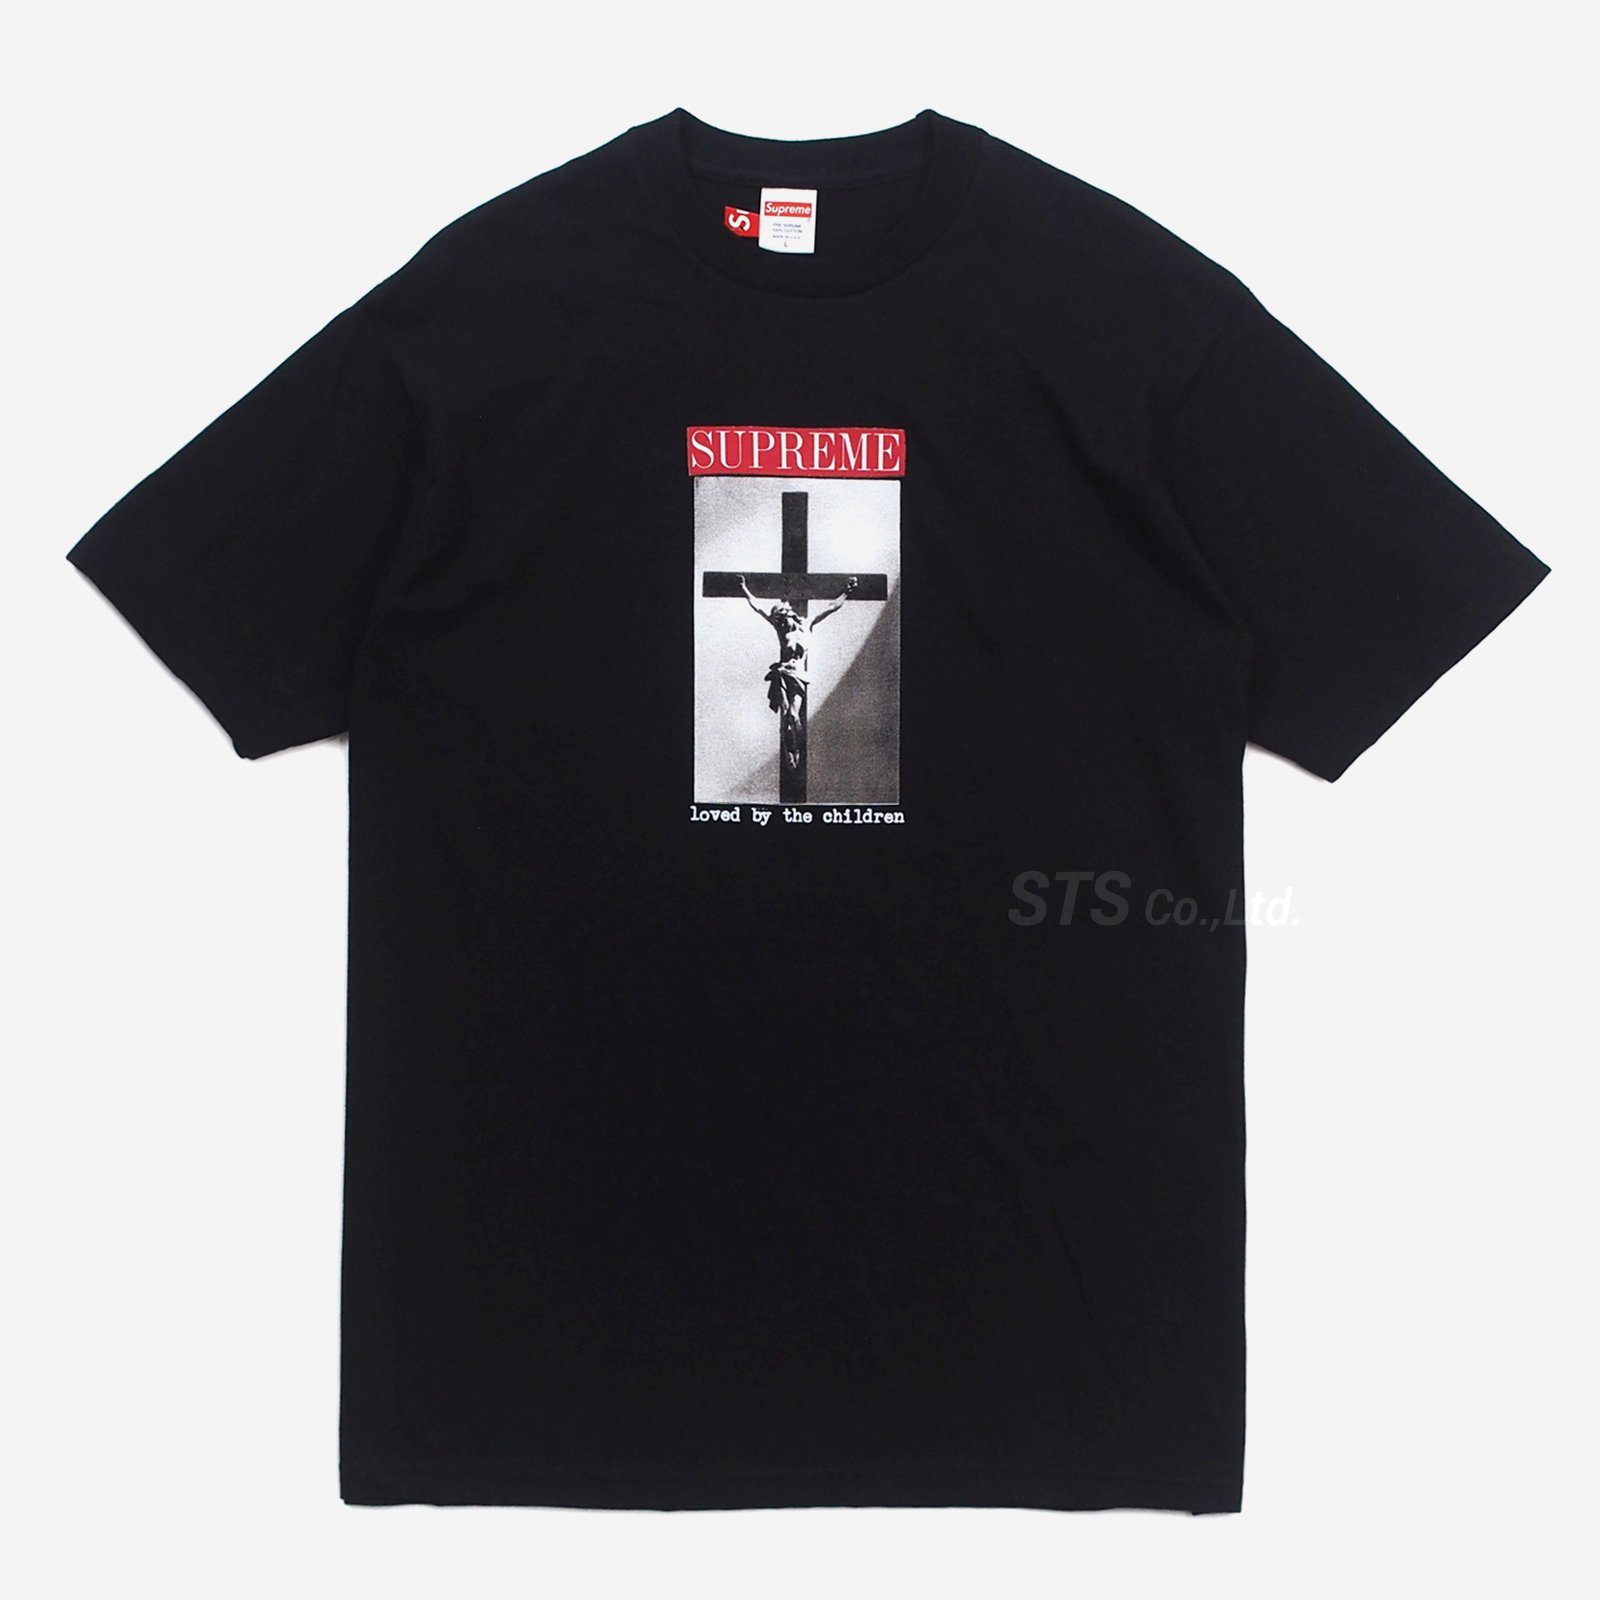 Supreme Loved by Children tee